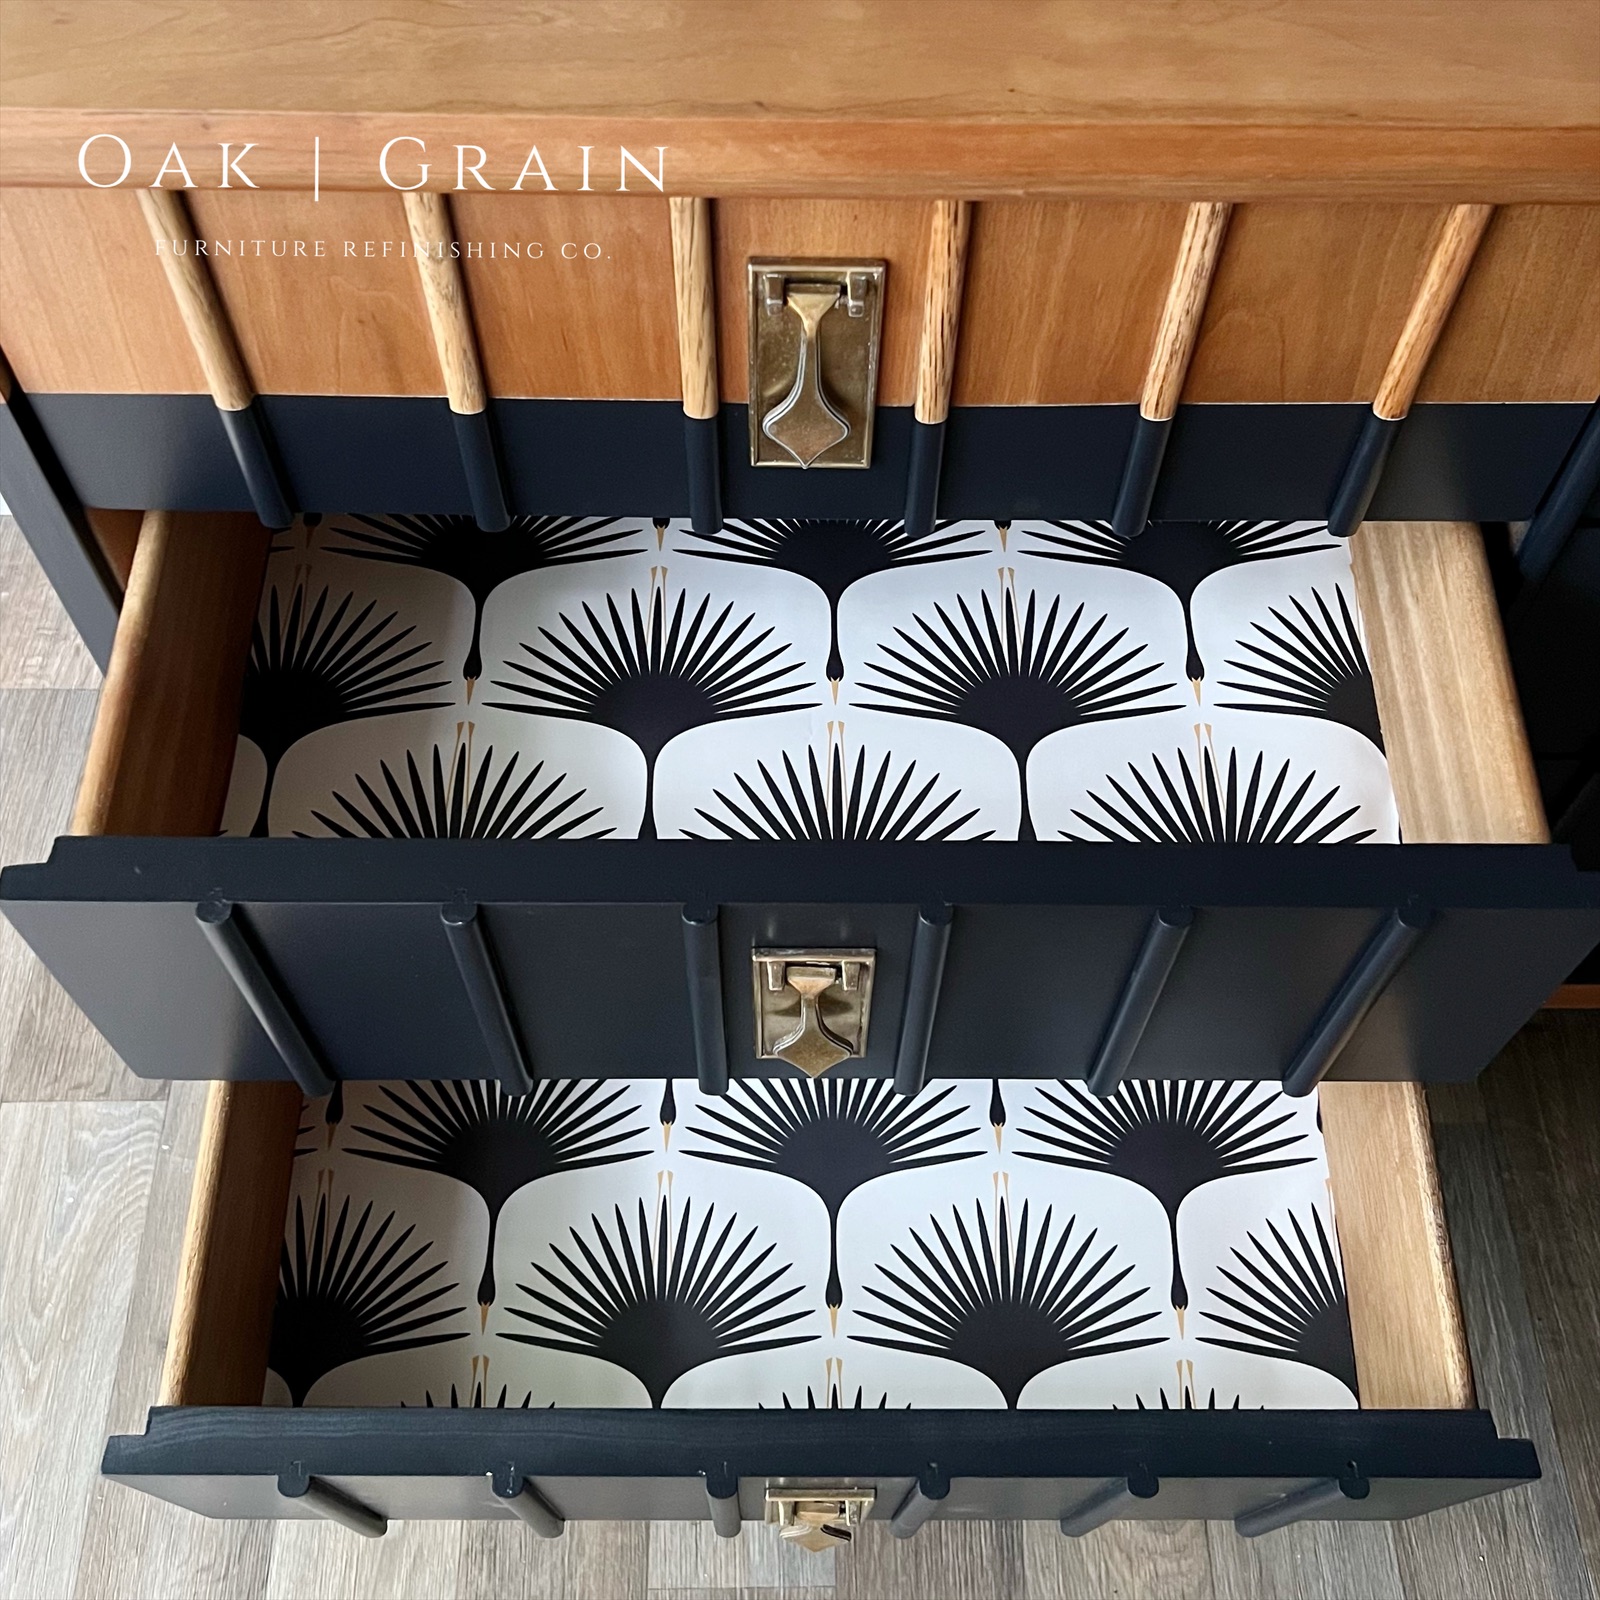 how to line drawers